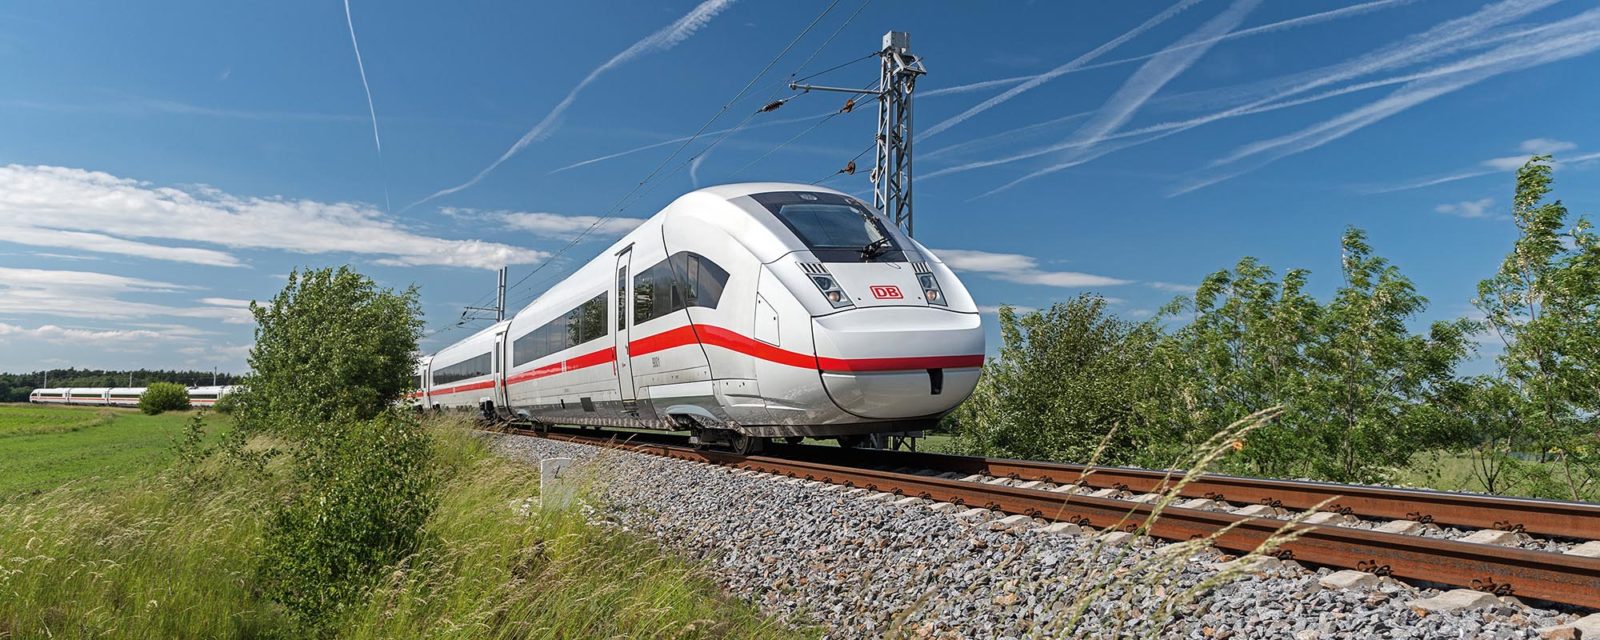 An ICE-4 high-speed train is posing on a test track on a sunny day.